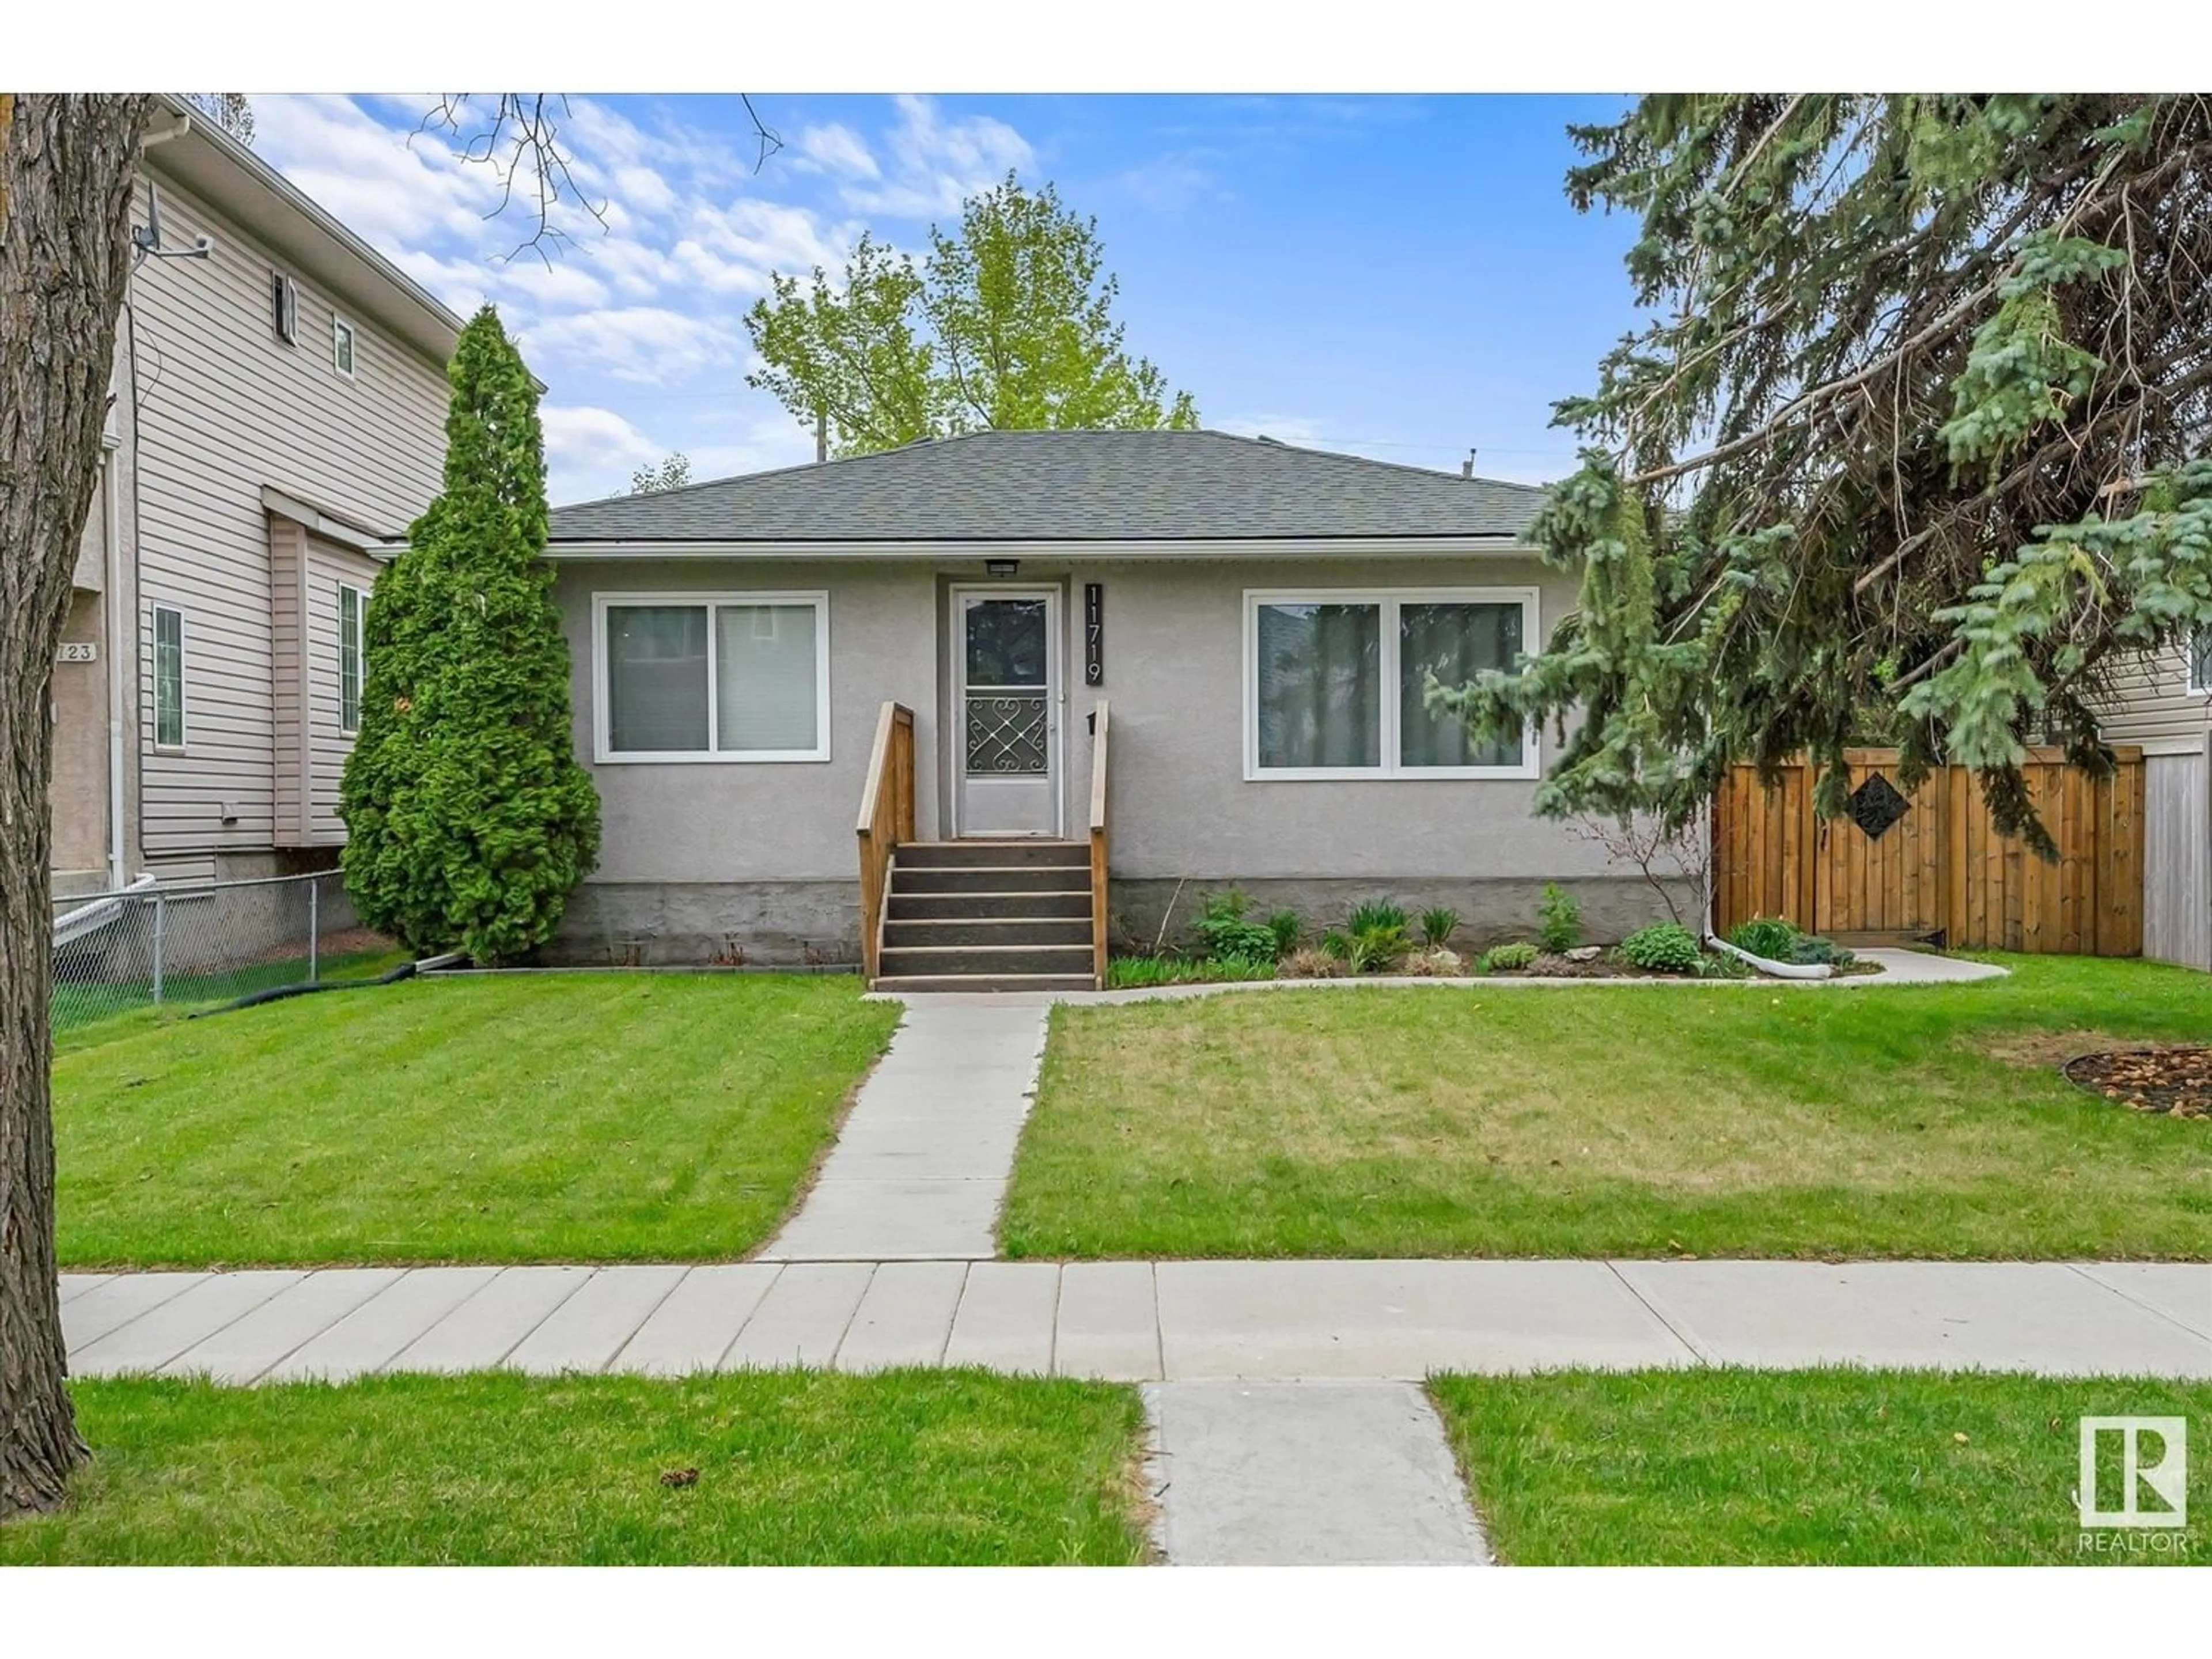 Frontside or backside of a home for 11719 122 ST NW, Edmonton Alberta T5M3J3